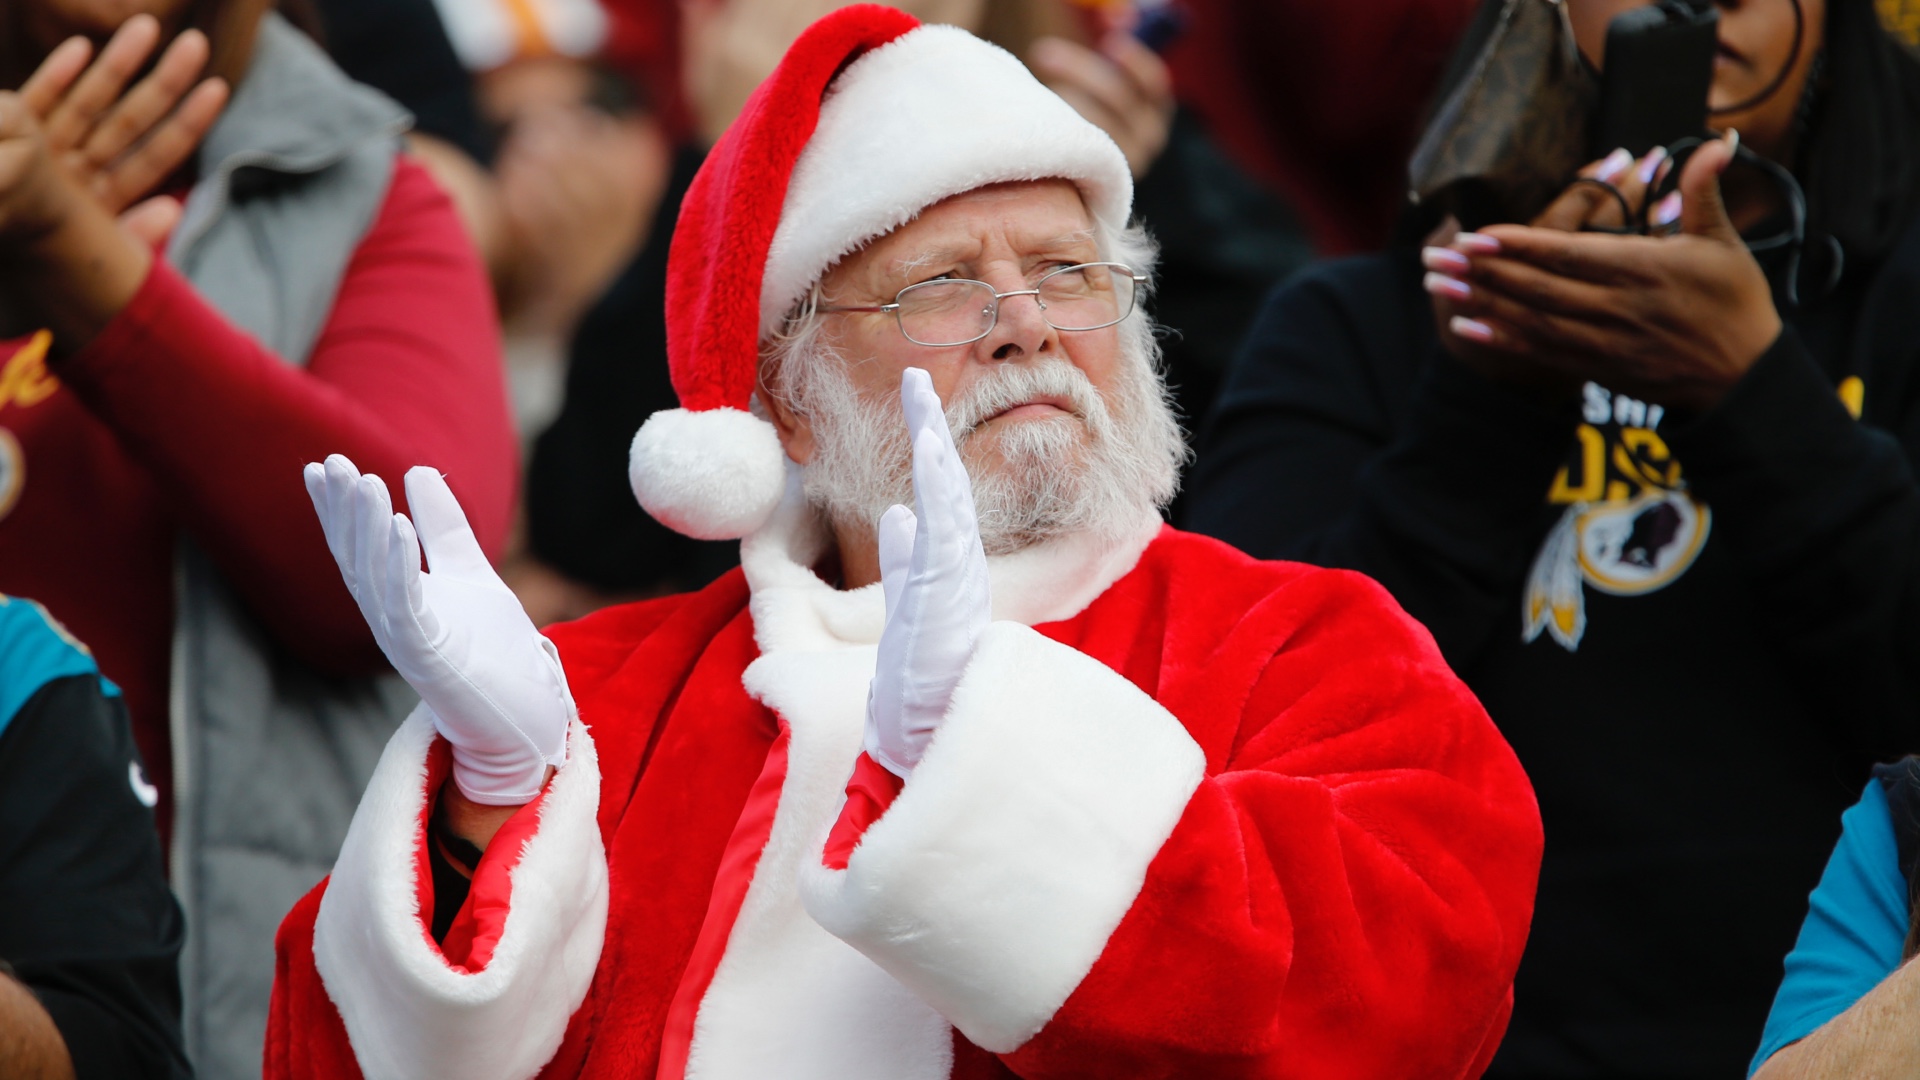 5 Last Minute Holiday Gift Ideas for Capitals, Wizards, Nationals, WFT Fans